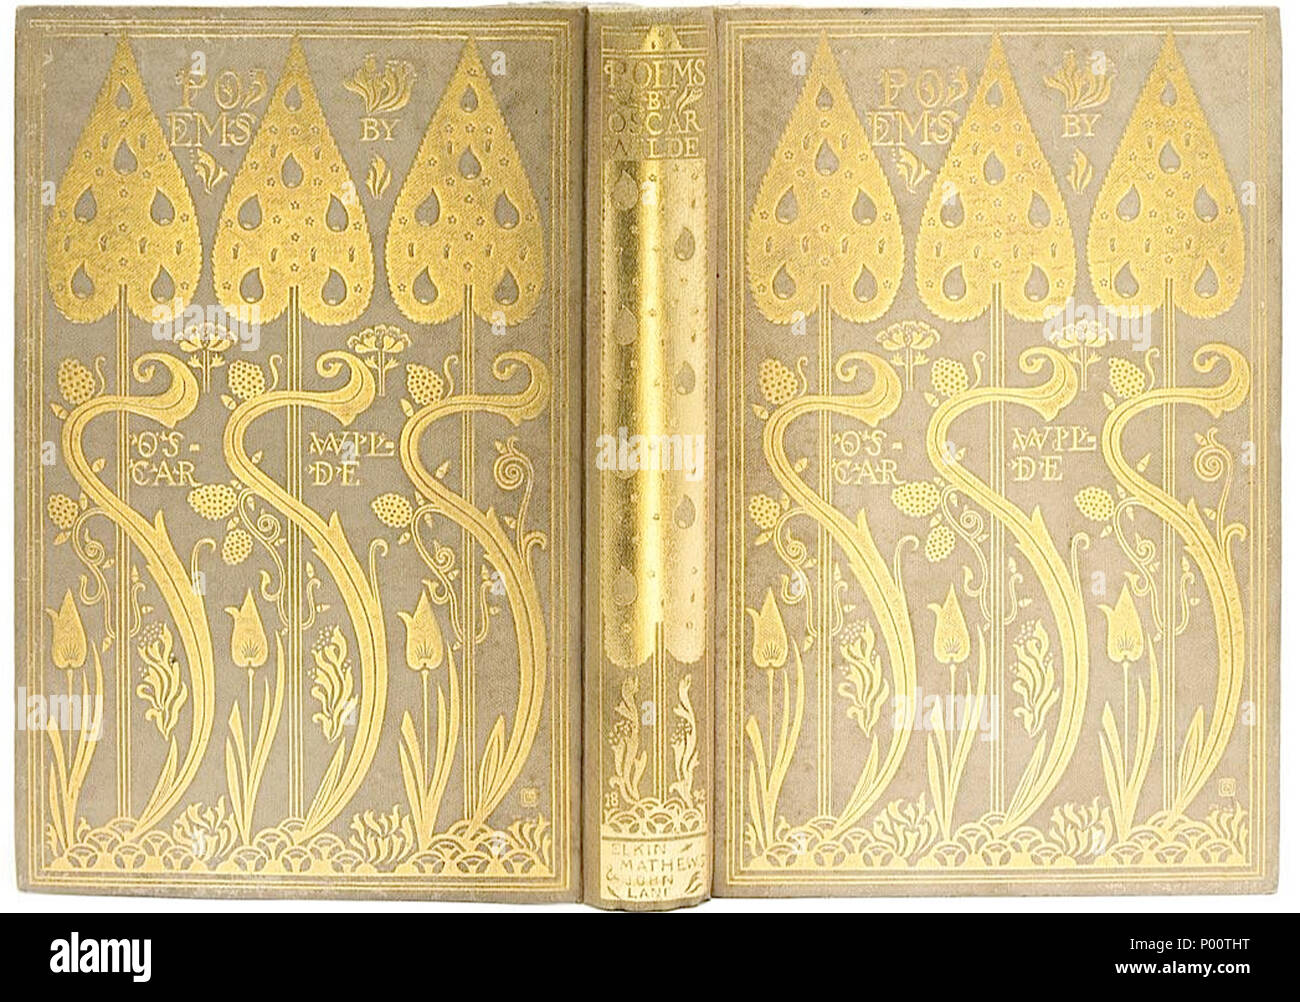 . English: Cover of Poems by Oscar Wilde, designed by Charles Ricketts - book published by Elkin Mathews & John Lane - The Bodley Head (London). 106 Wilde Poems Cover Stock Photo